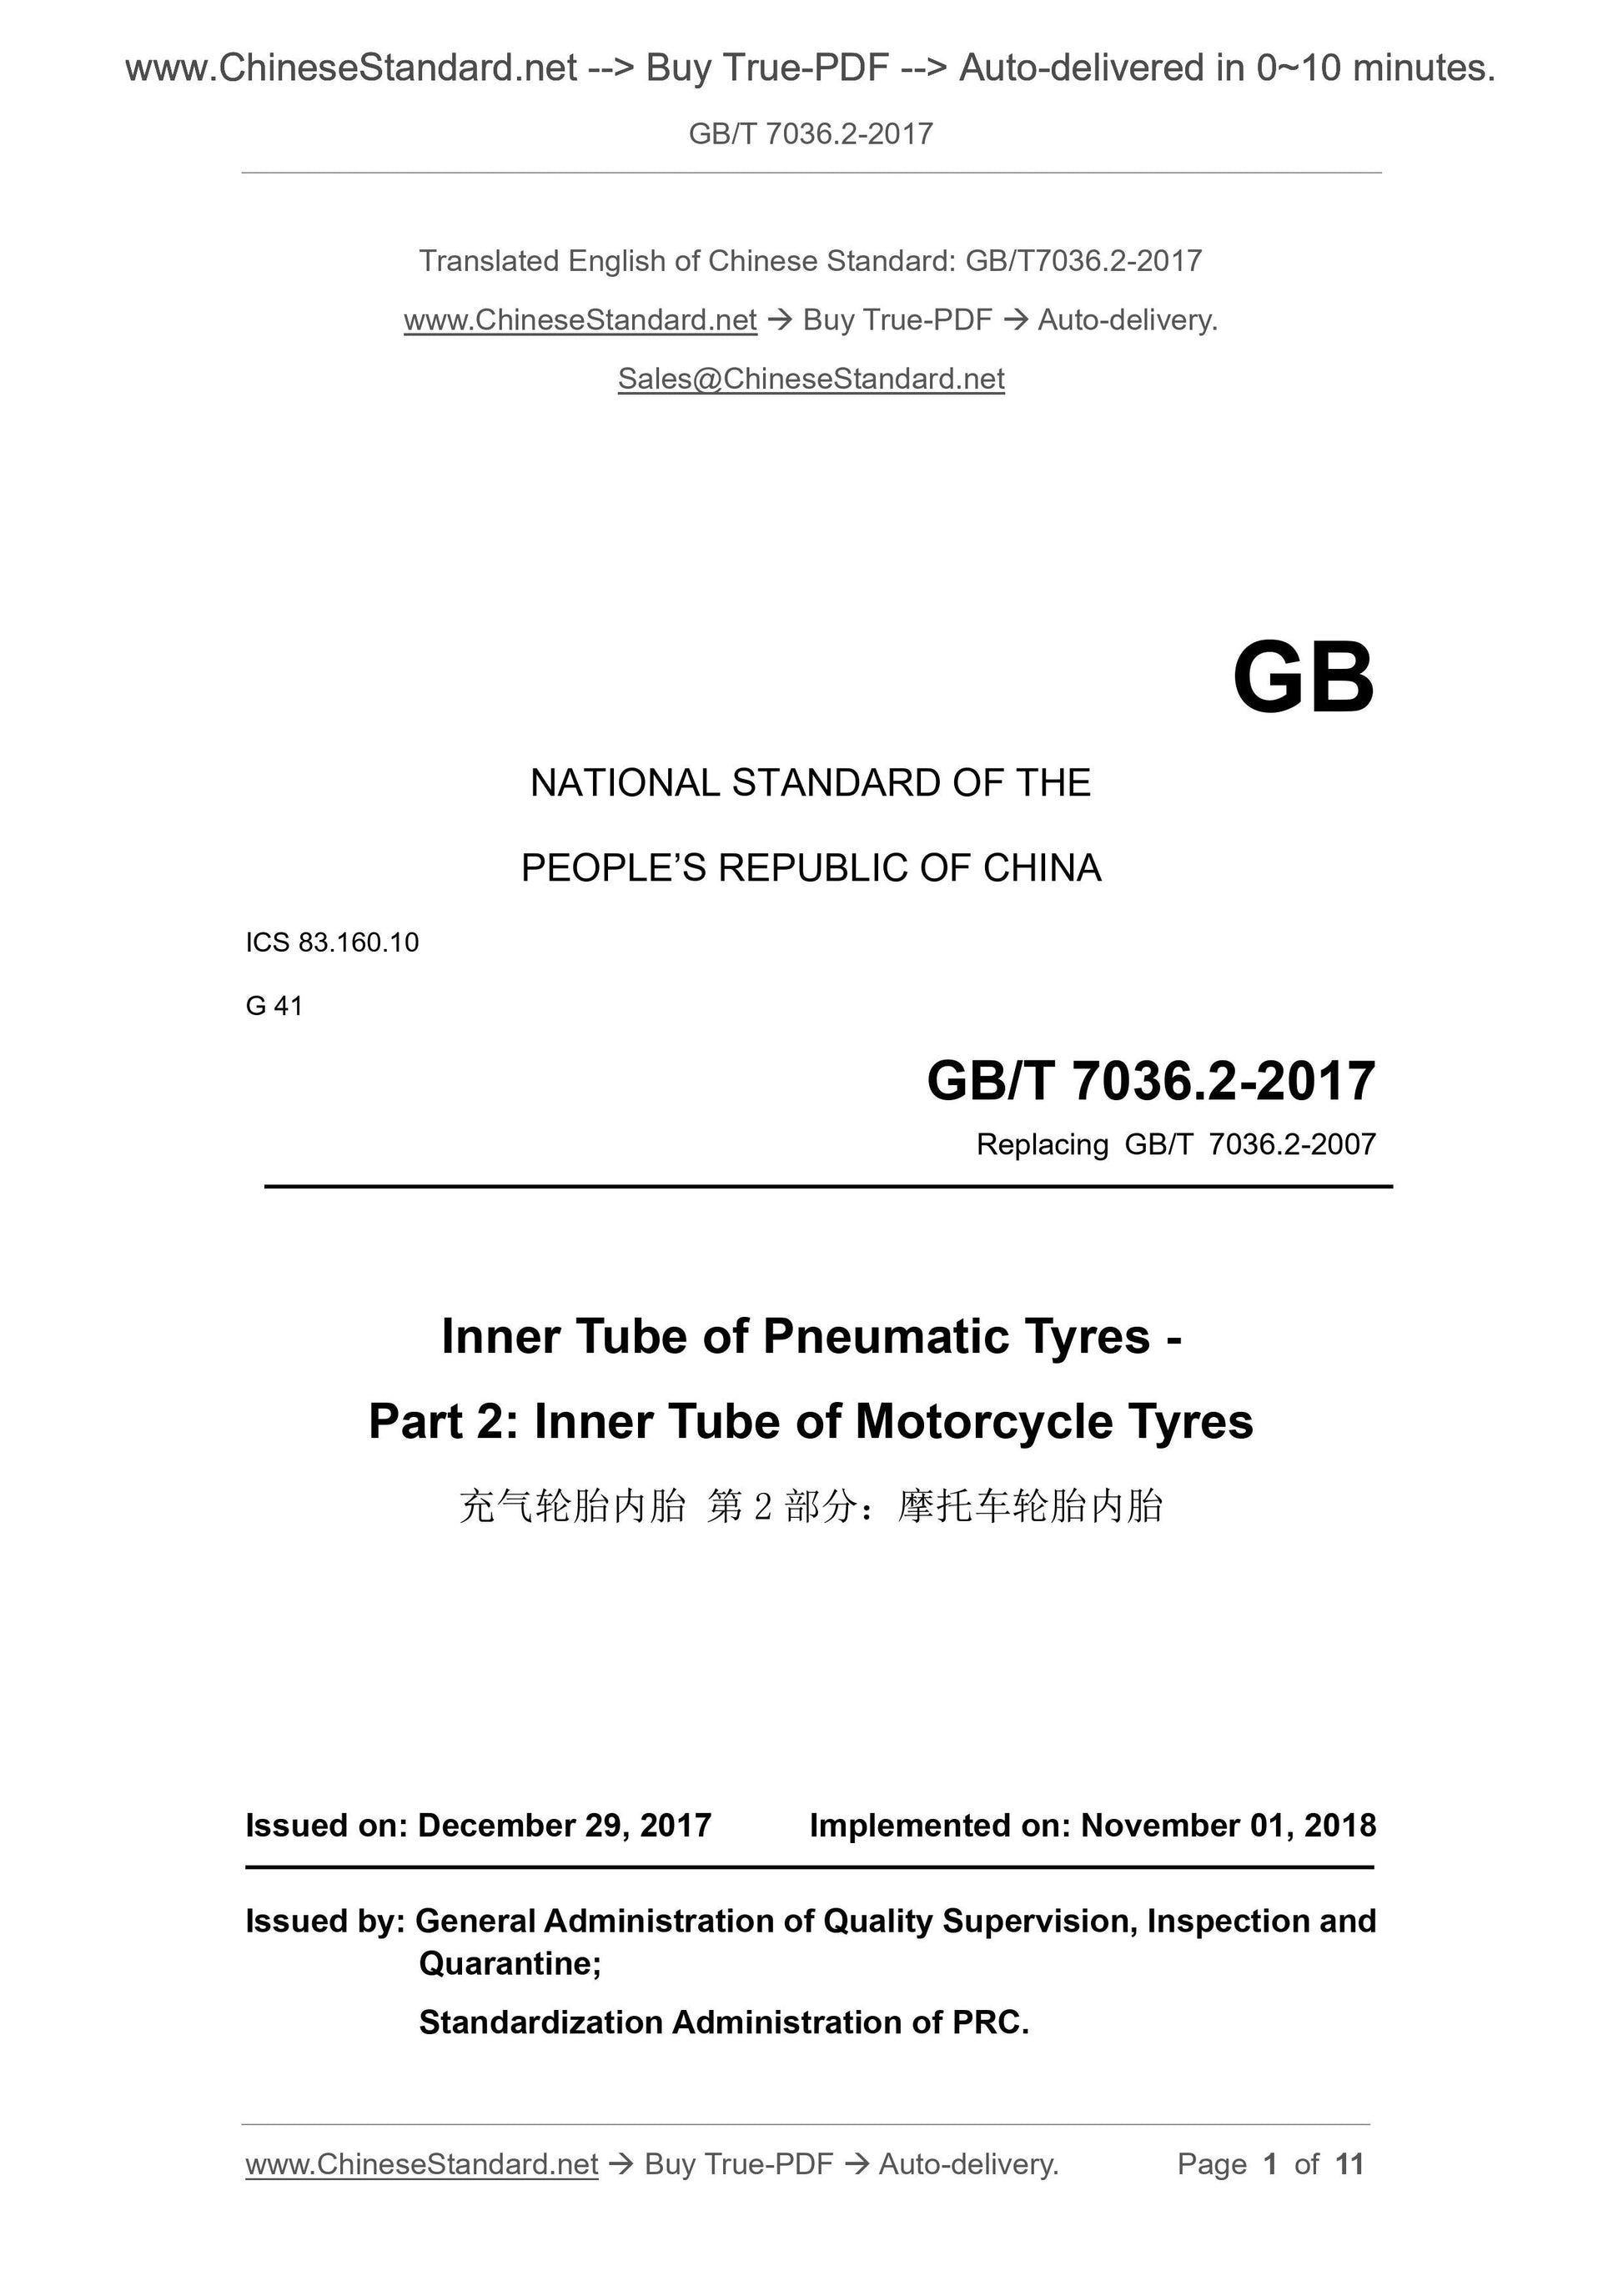 GB/T 7036.2-2017 Page 1